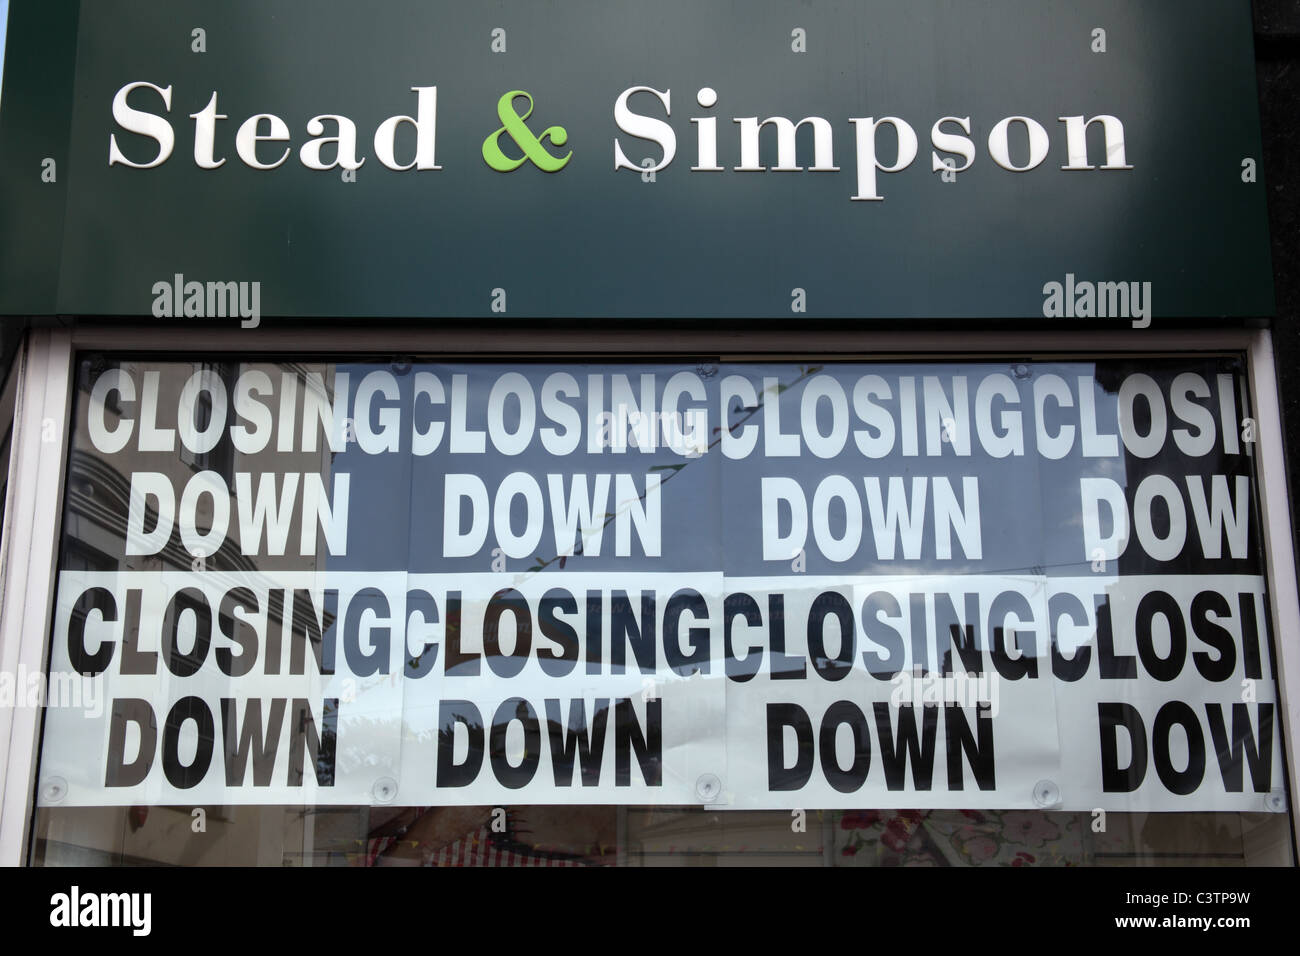 Stead and Simpson Shop Closing Down, Cornwall Stock Photo